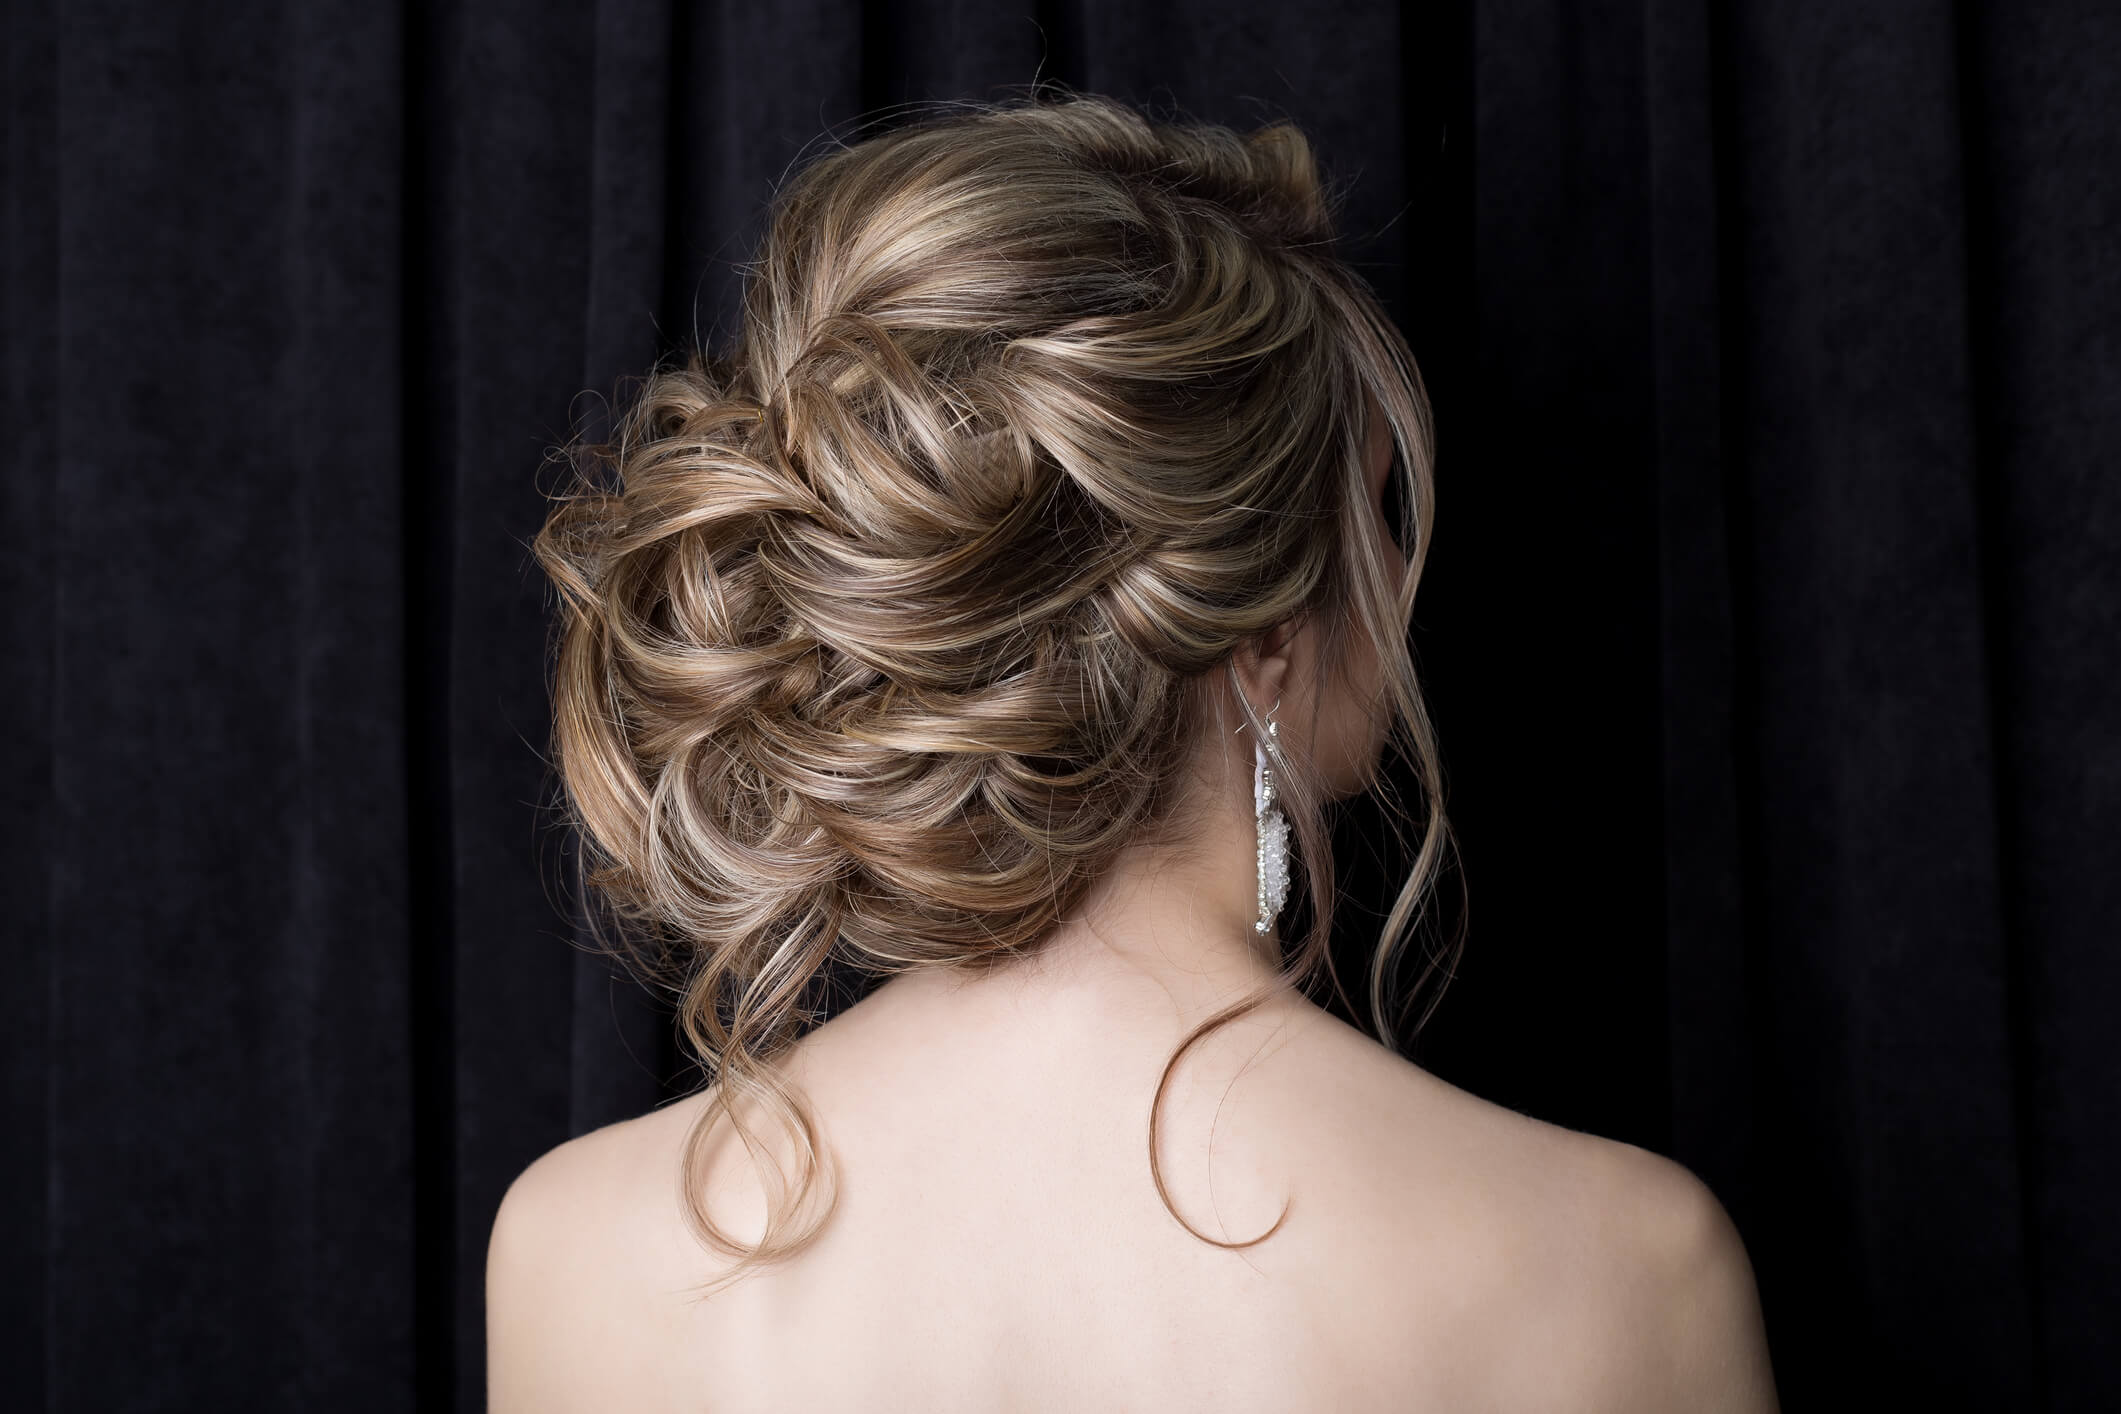 Image of a styled hair 